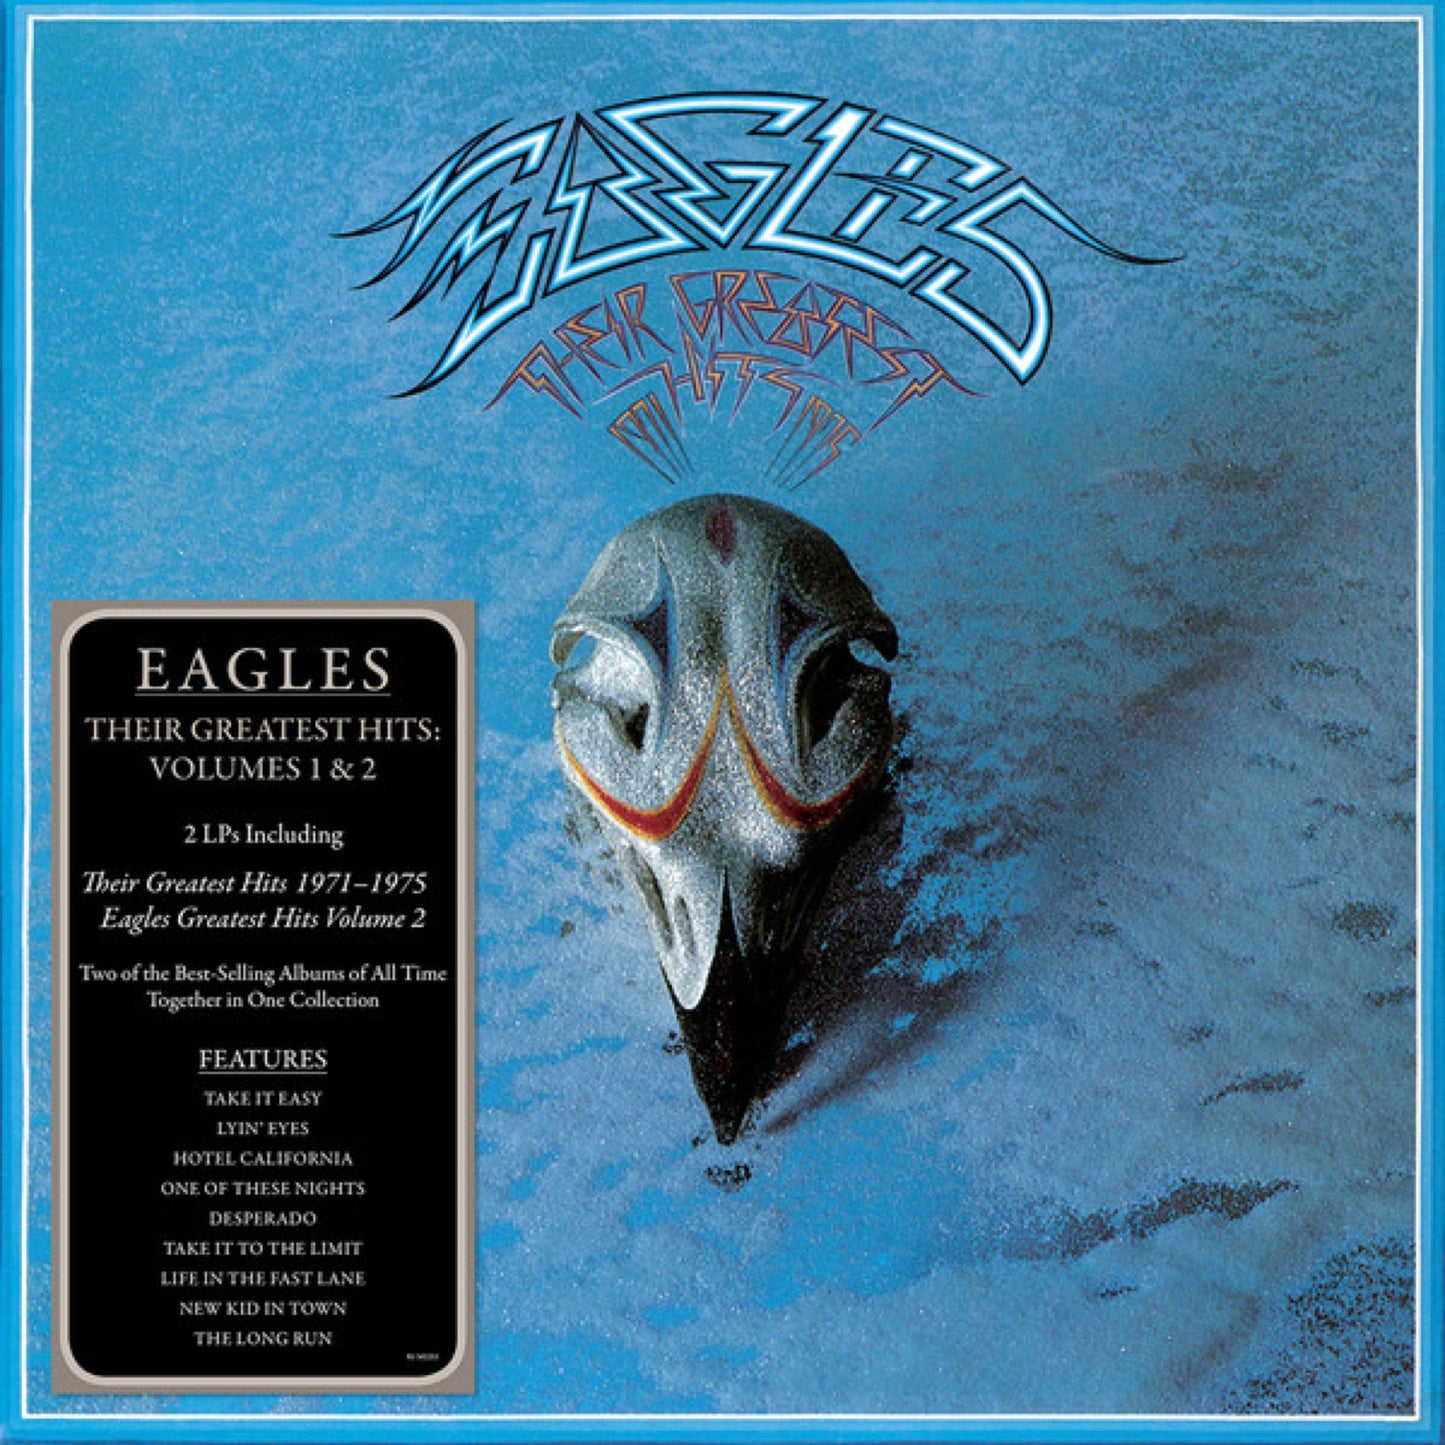 Eagles - Greatest Hits Vol. 1 & 2